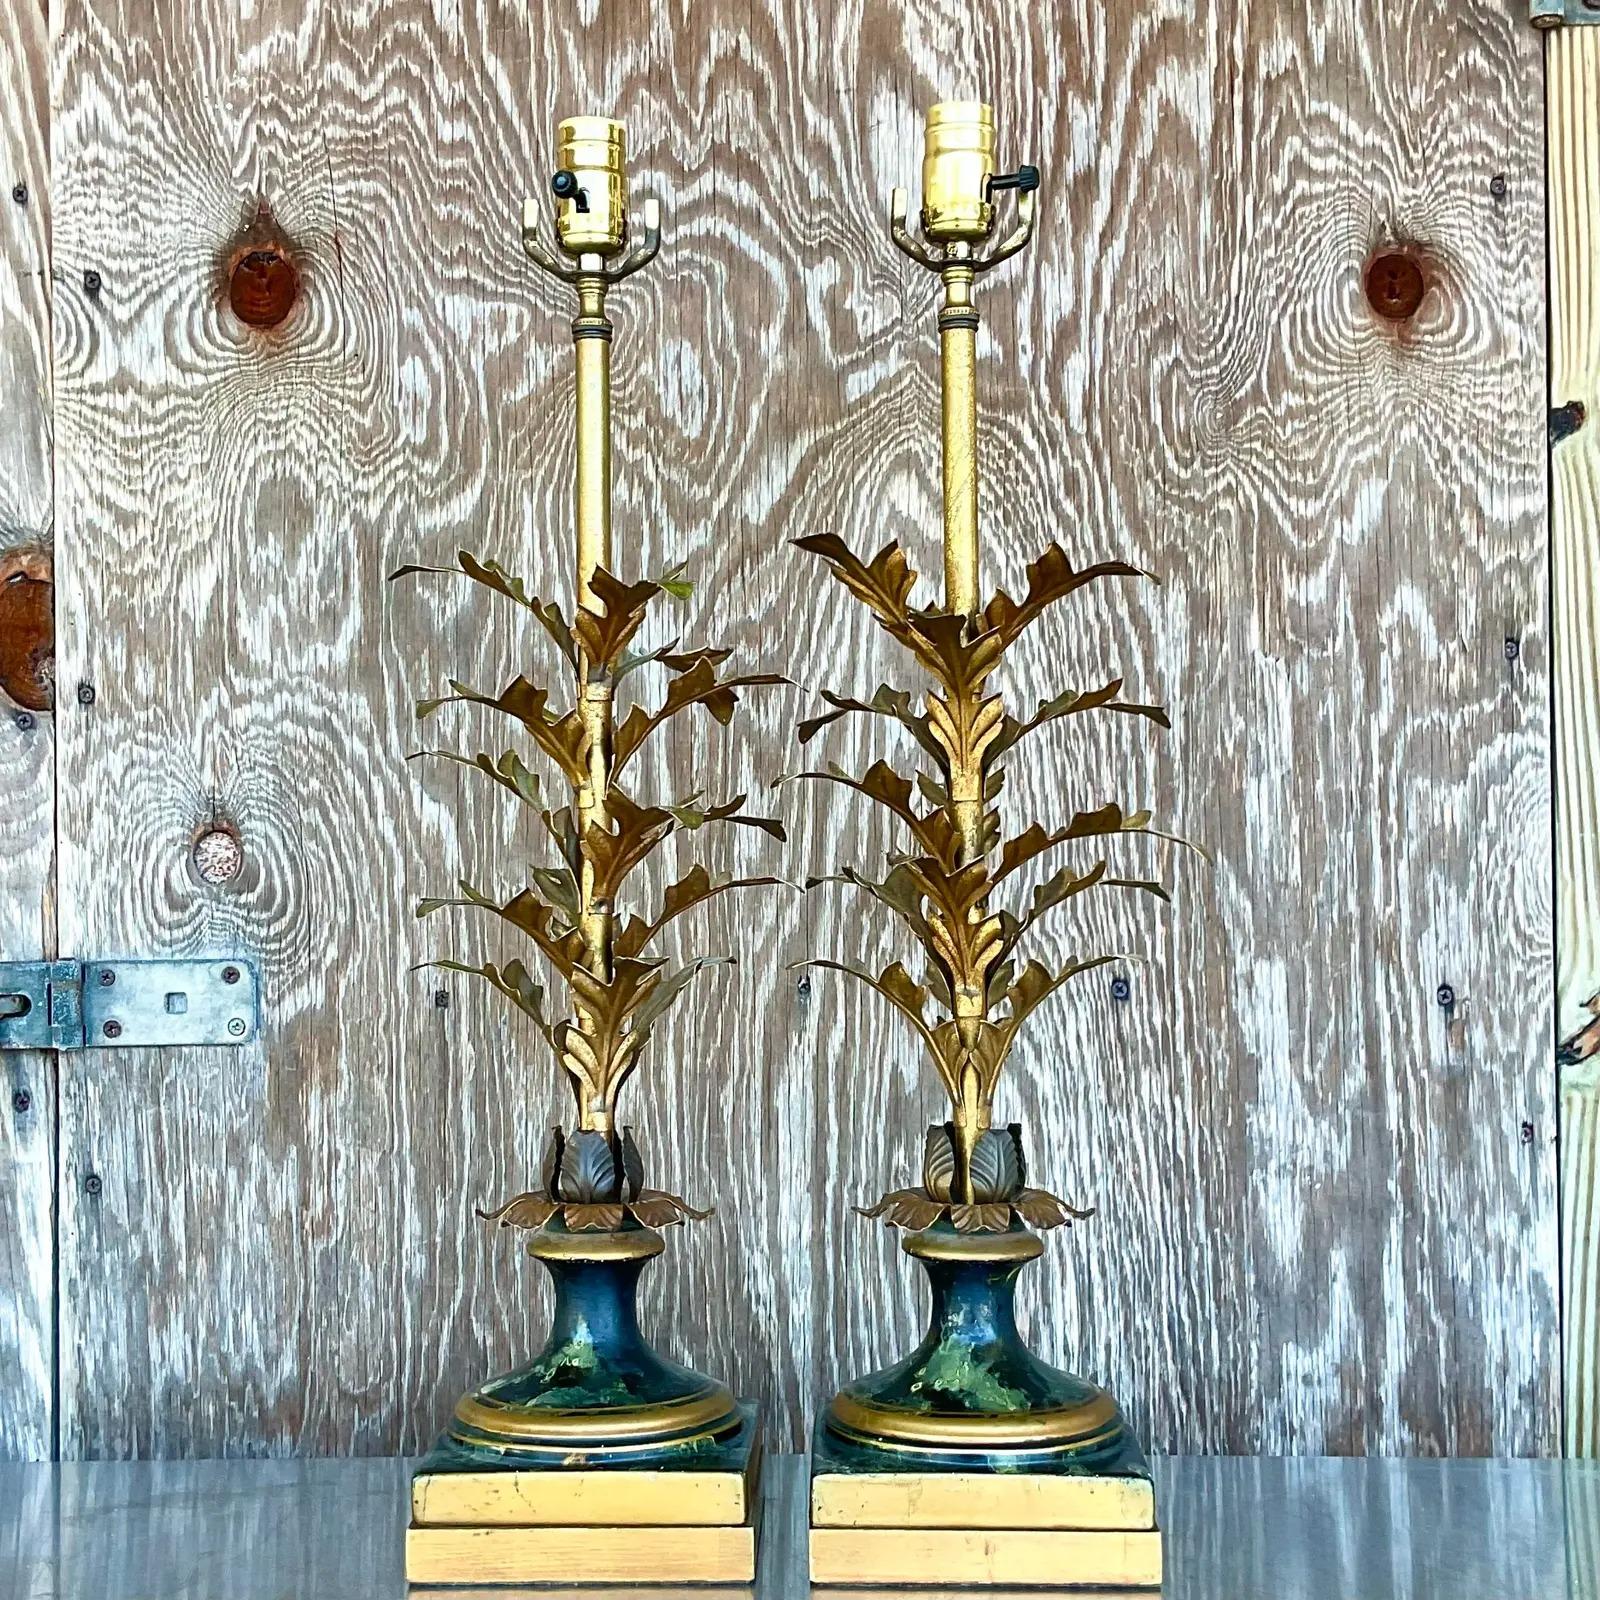 A fantastic pair of vintage Regency lamps. Beautiful leaf design with bright gilt finish. Rests on stunning hand painted plinths. Fully restored with all new wiring and hardware. Acquired from a Palm Beach estate.

The lamps are in great vintage